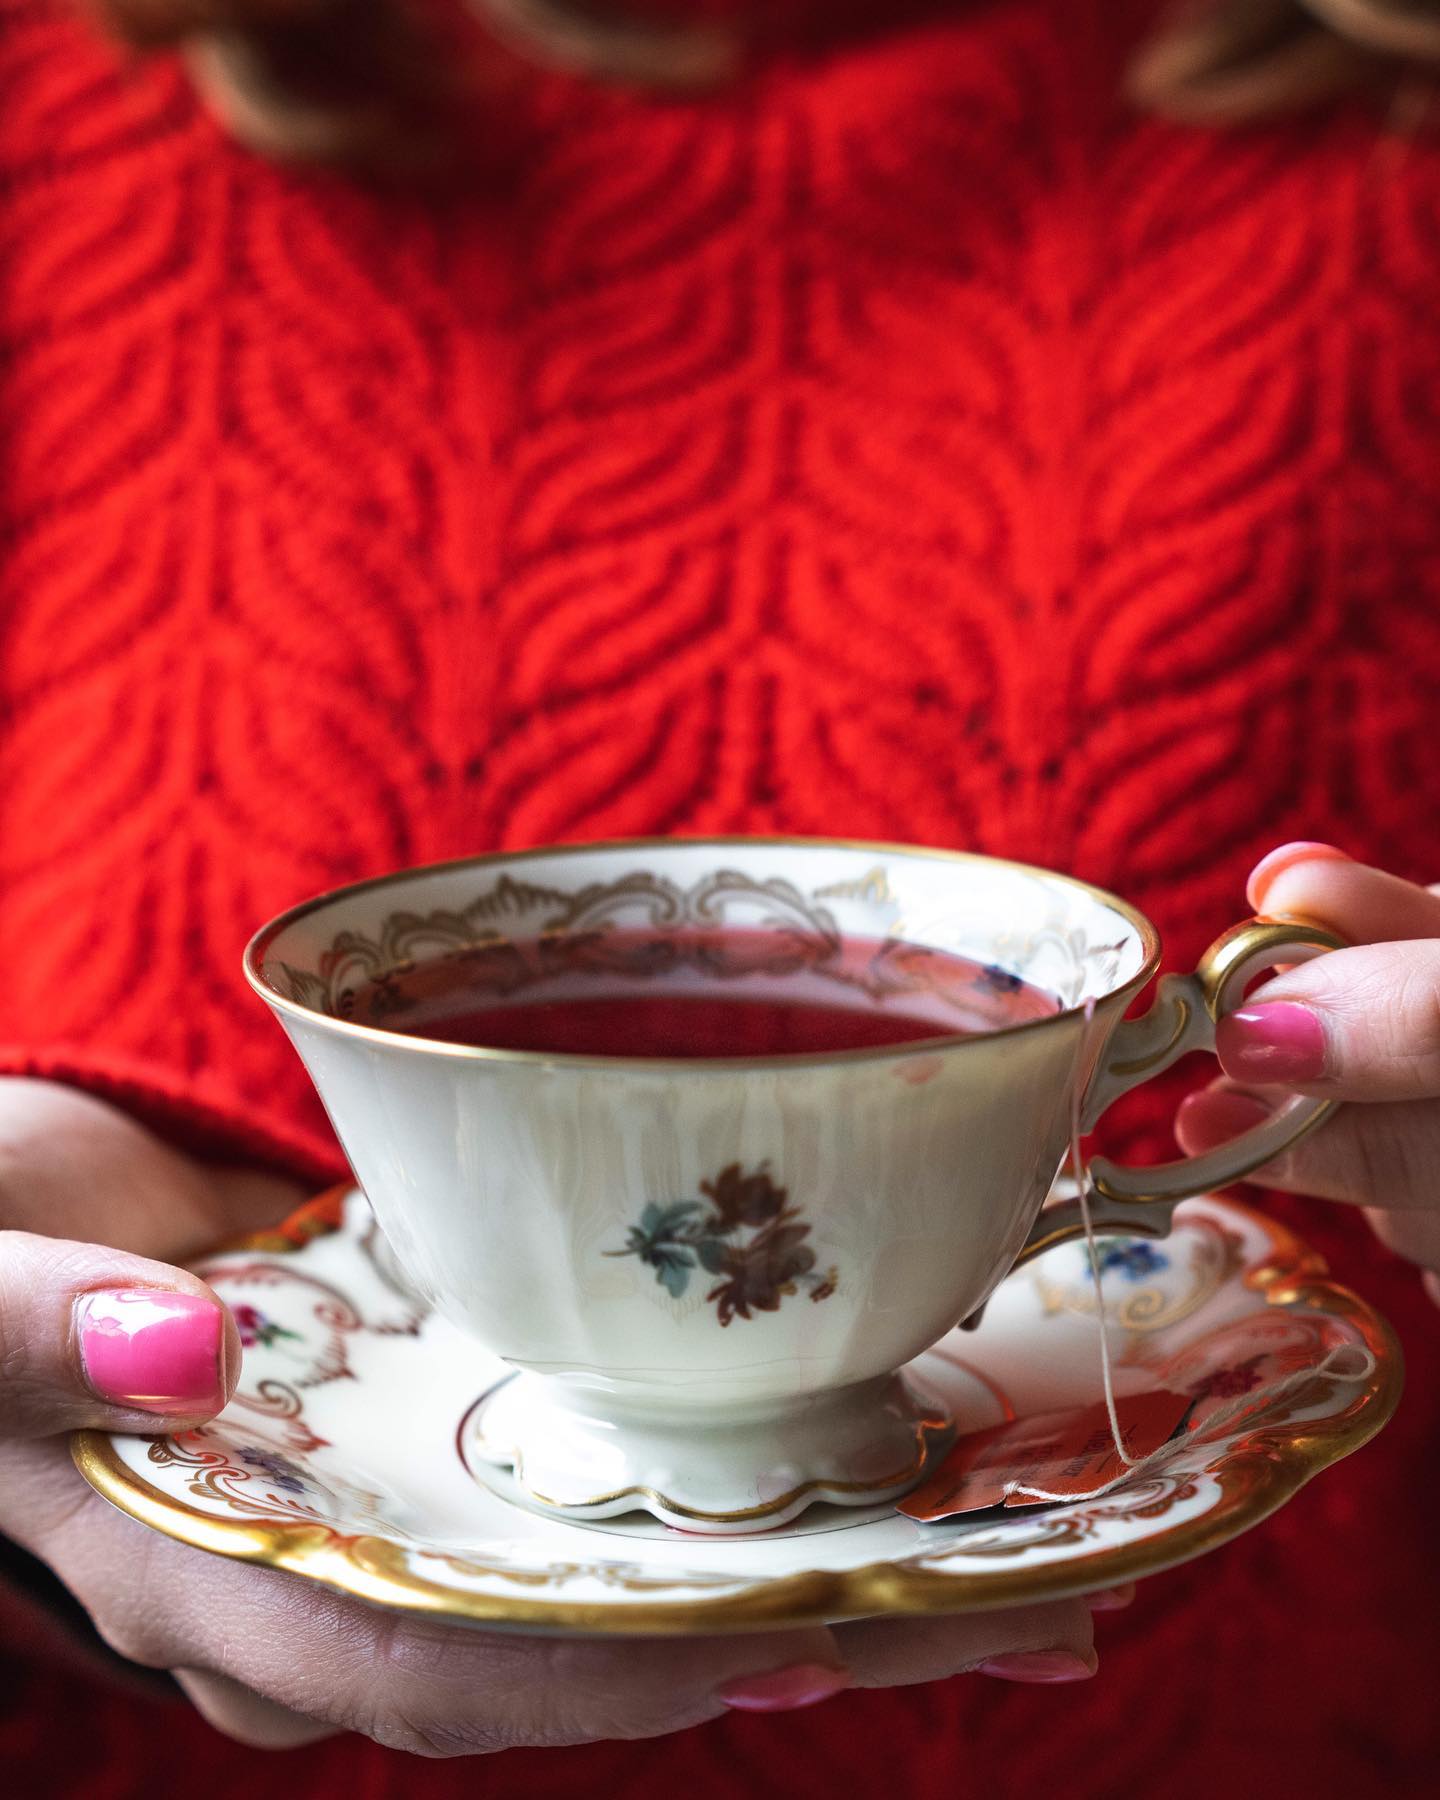 A nice cup of tea to keep you warm ☕️❤️

It’s freaking cold outside, if I had a choice I wouldn’t leave the house all day and just cozy up under a blanket and drink tea non stop 😊 

The third day of the #foodartproject #foodartevaproject challenge is about the emotions the colour red evokes which for me are obviously love, passion and power but also warmth ❤️

Hosted by @foodartproject @thesouthasiankitchen judged by @evakosmasflores and with prizes from @errer.backdrops - thank you for these fun three days, it really gave me so much inspiration to create again and work with colour! 

#foodphotography #foodstyling #foodshot #tastingtable #foodblogliebe #feedfeed #foodblogfeed #foodtographyschool #foodfluffer #tohfoodie #foodartblog #foodartblogs #foodartproject #foody365 #cuisine_creations #hezzahezfood #fnceats #beautifulcuisines #teatime #teatimepoetry #rusticstyle #antiqueporcelain #antiquefinds